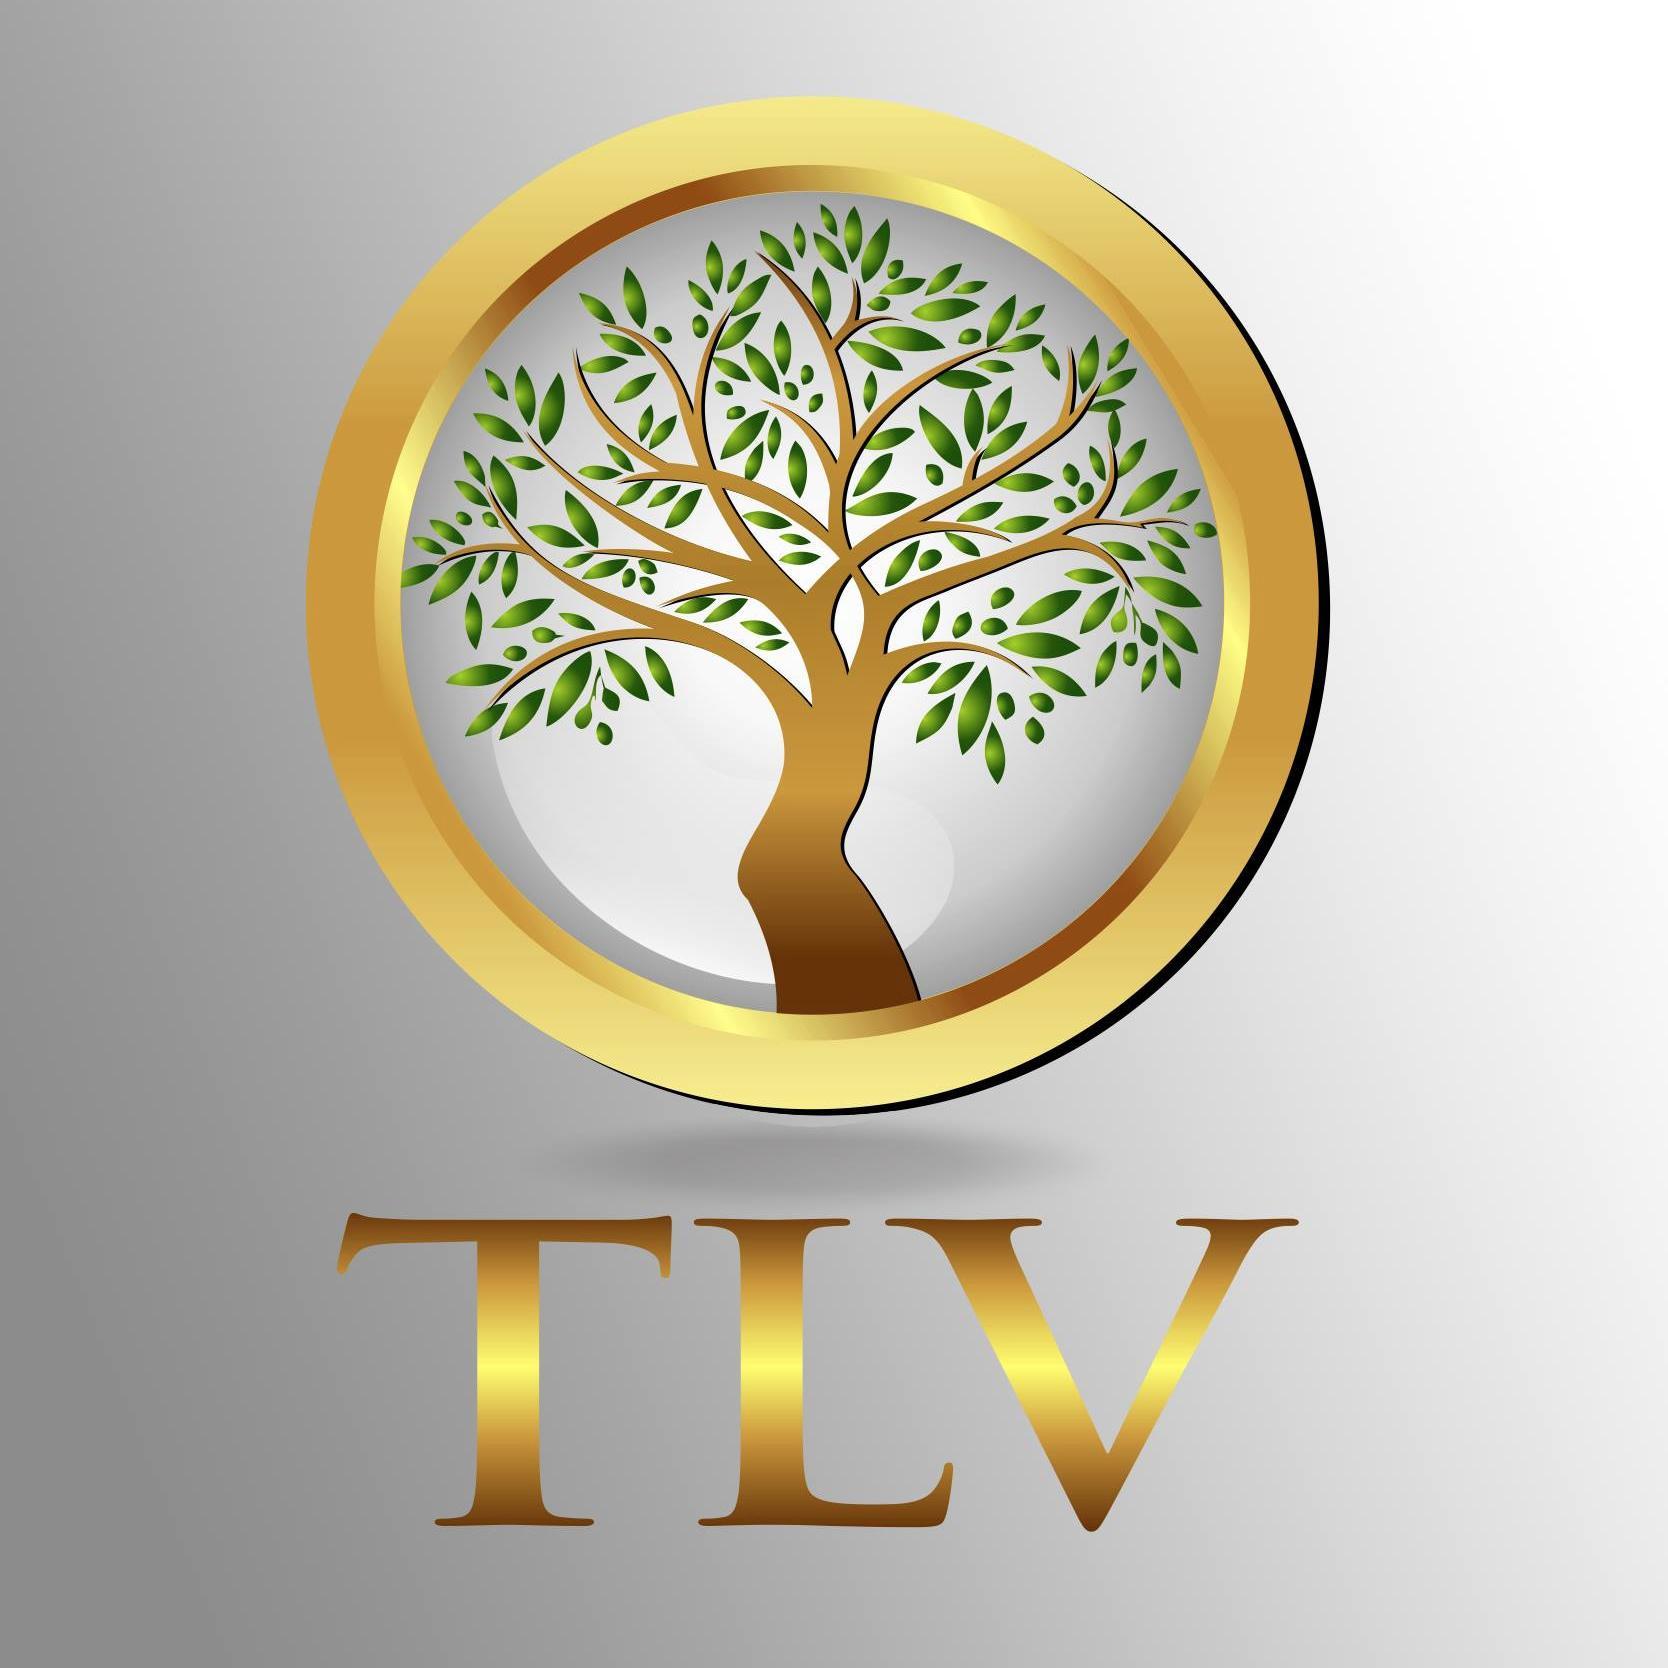 The TLV is a BRAND NEW Jewish translation, from Genesis to Revelation, created by the @TLVBibleSociety. #tlvbible